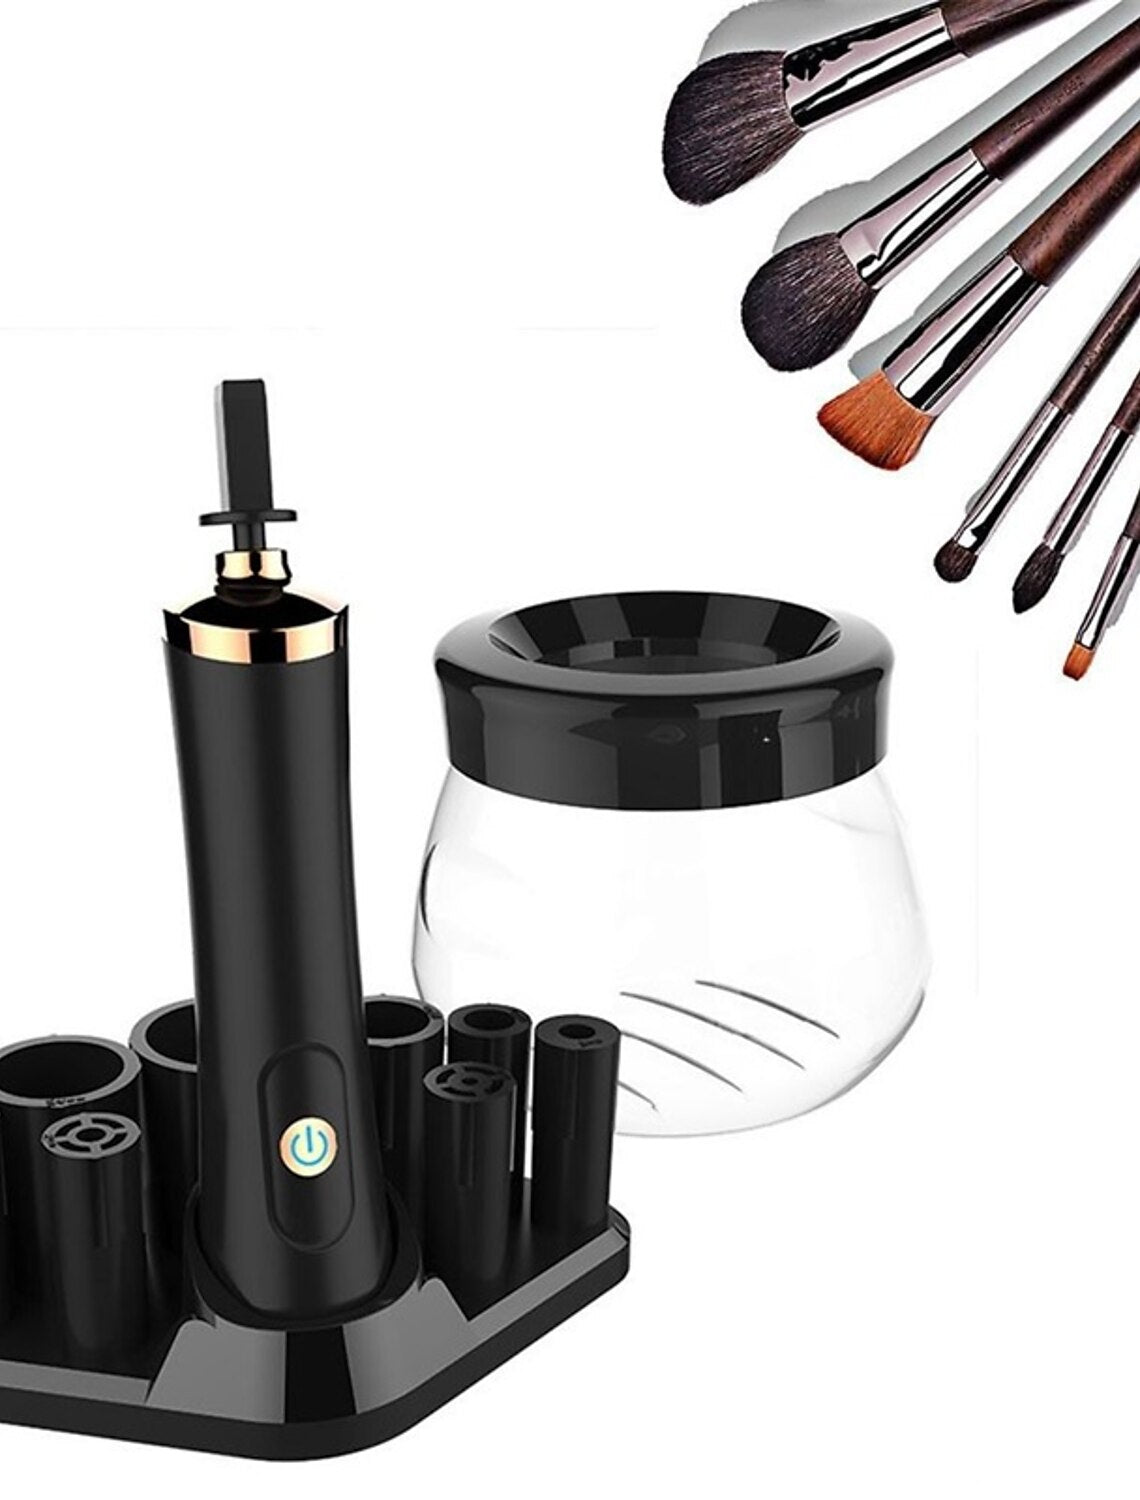 Electric Makeup Brush Cleaner Cosmetics Makeup Brushes Cleaner Tools Auto Cleaning Washing Quick Drying Make Up Brush Cleaner